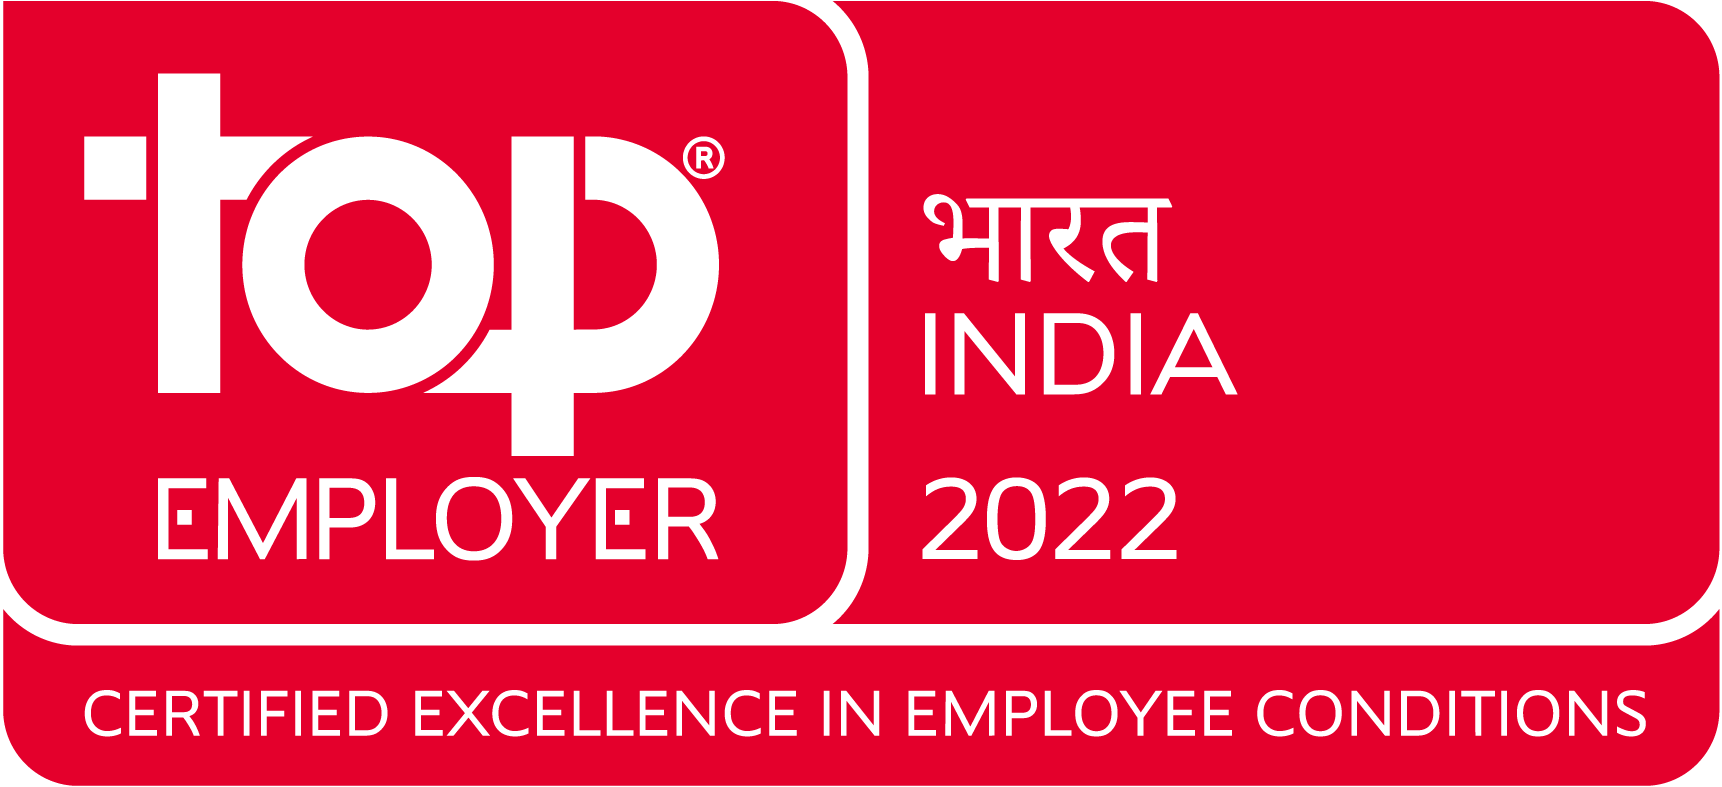 Top_Employer_India_2022 1.png